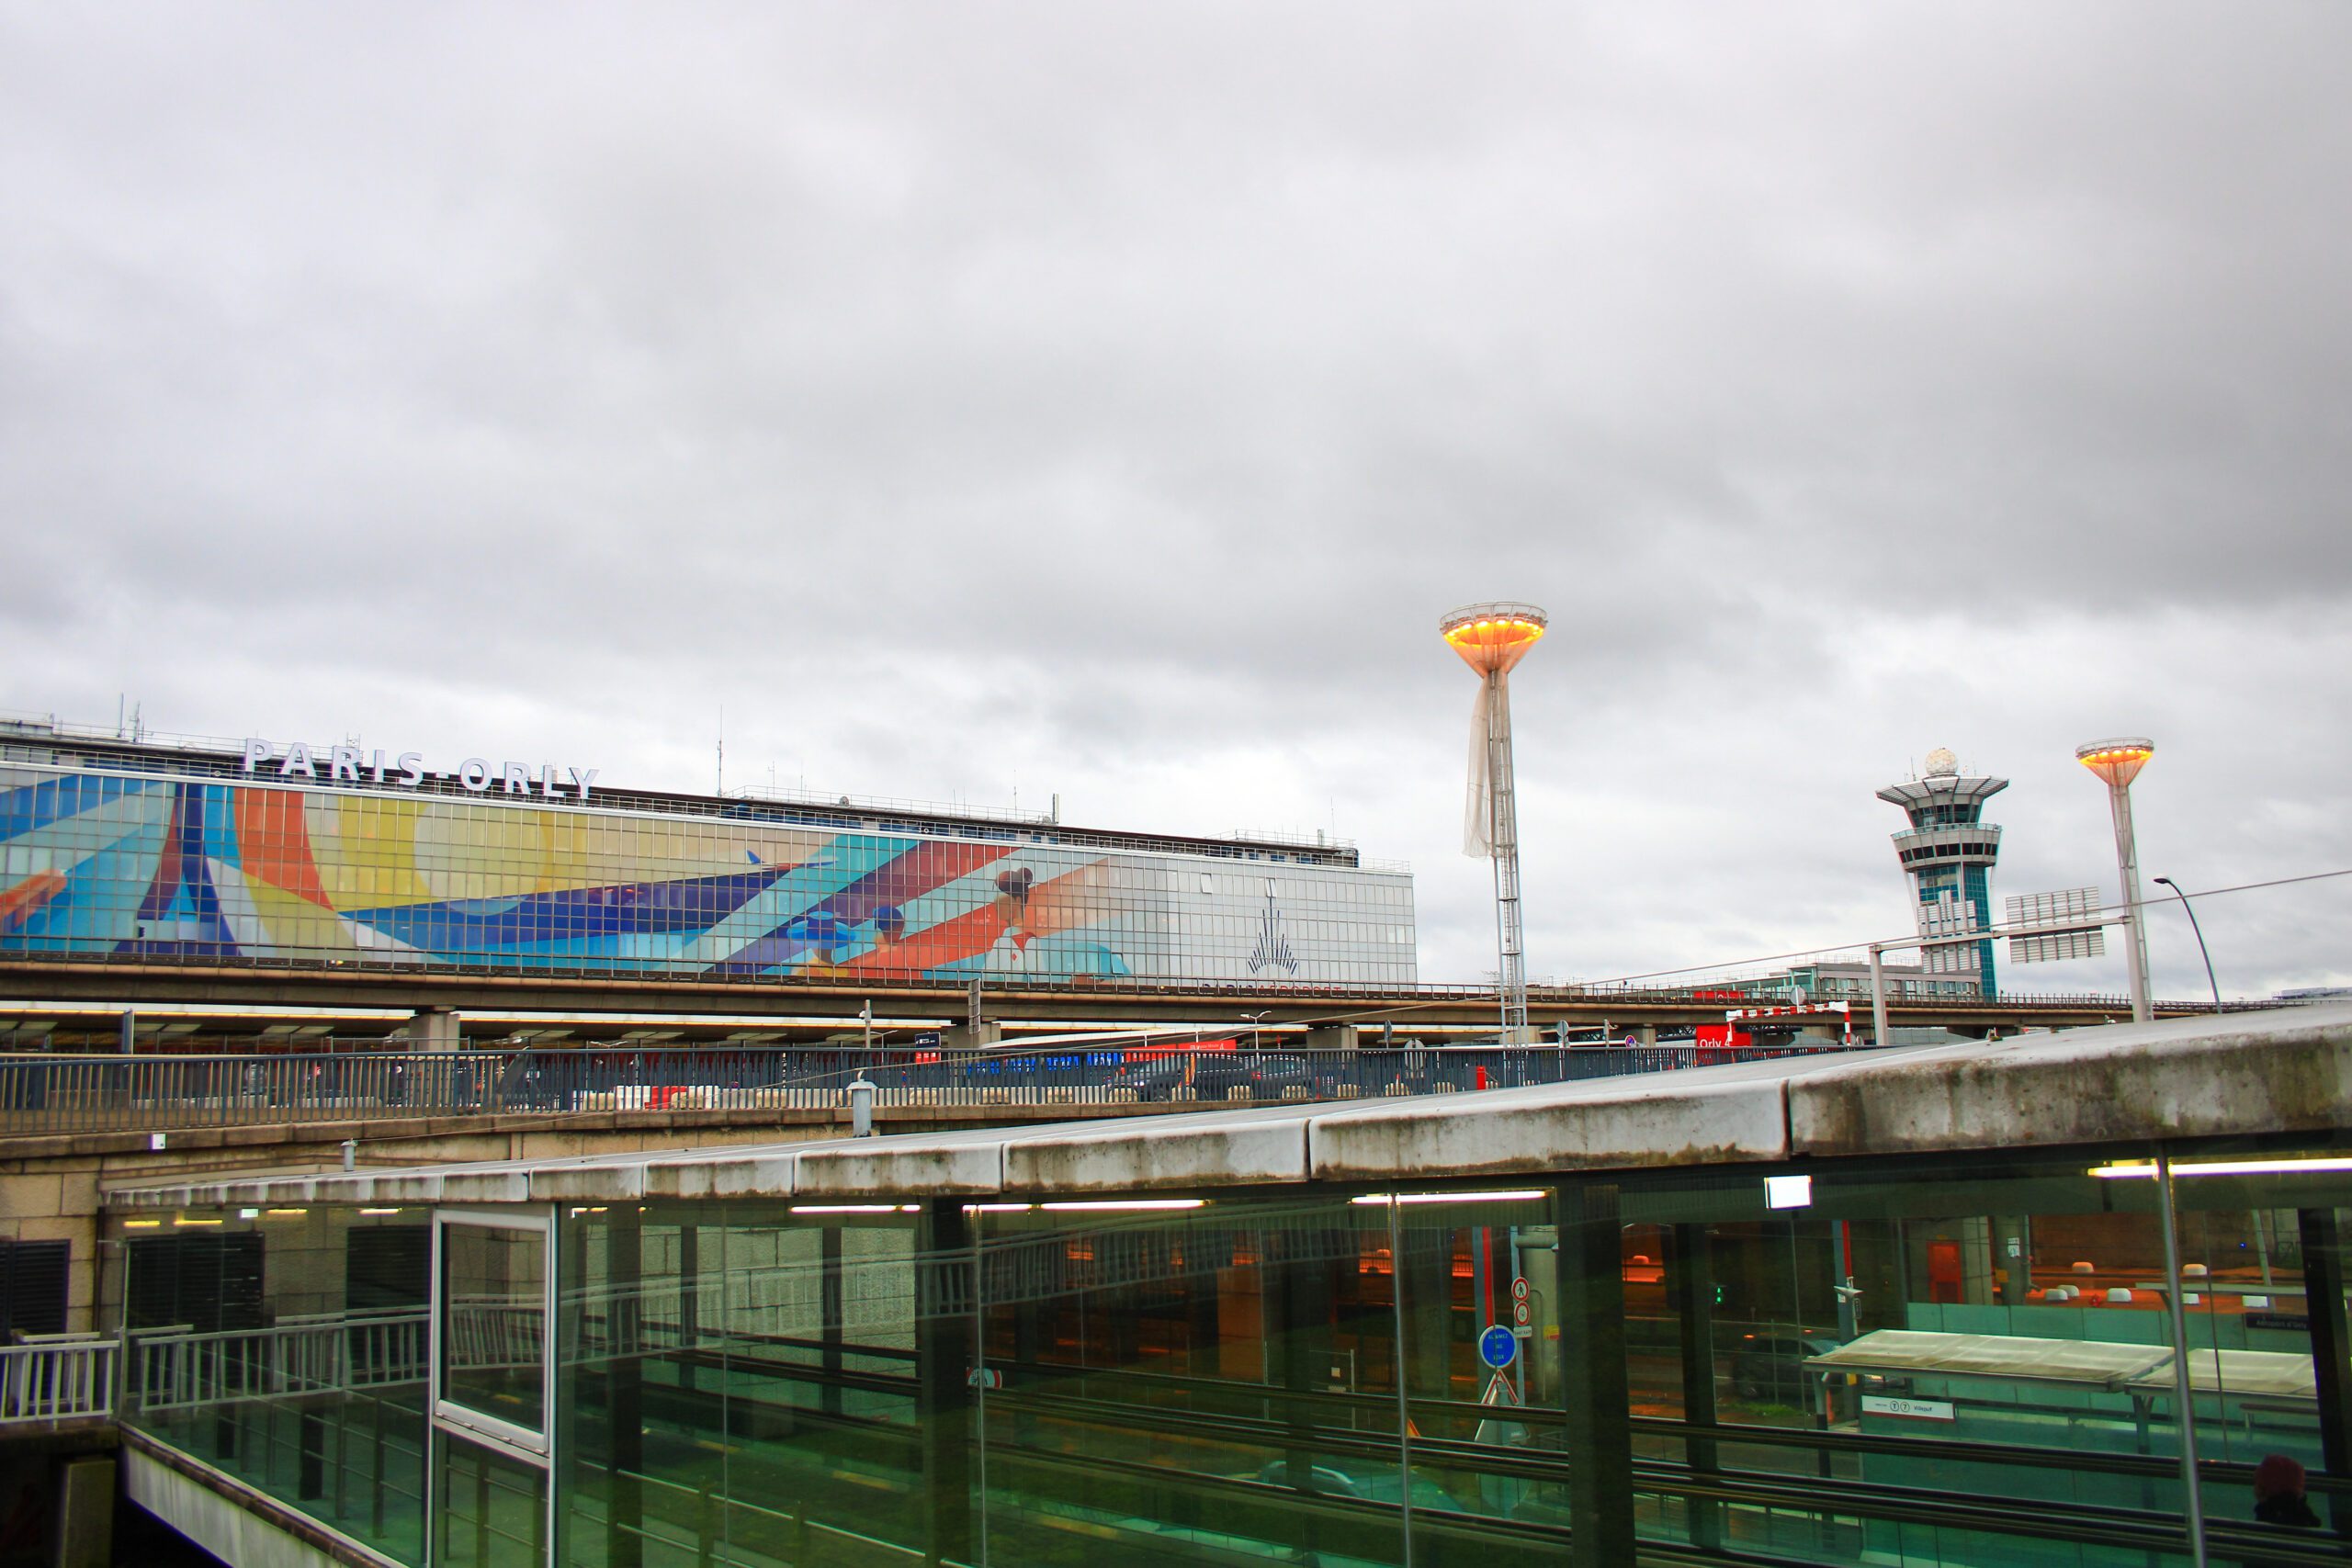 Front of the orly south terminal. Departure and arrival area for international flights